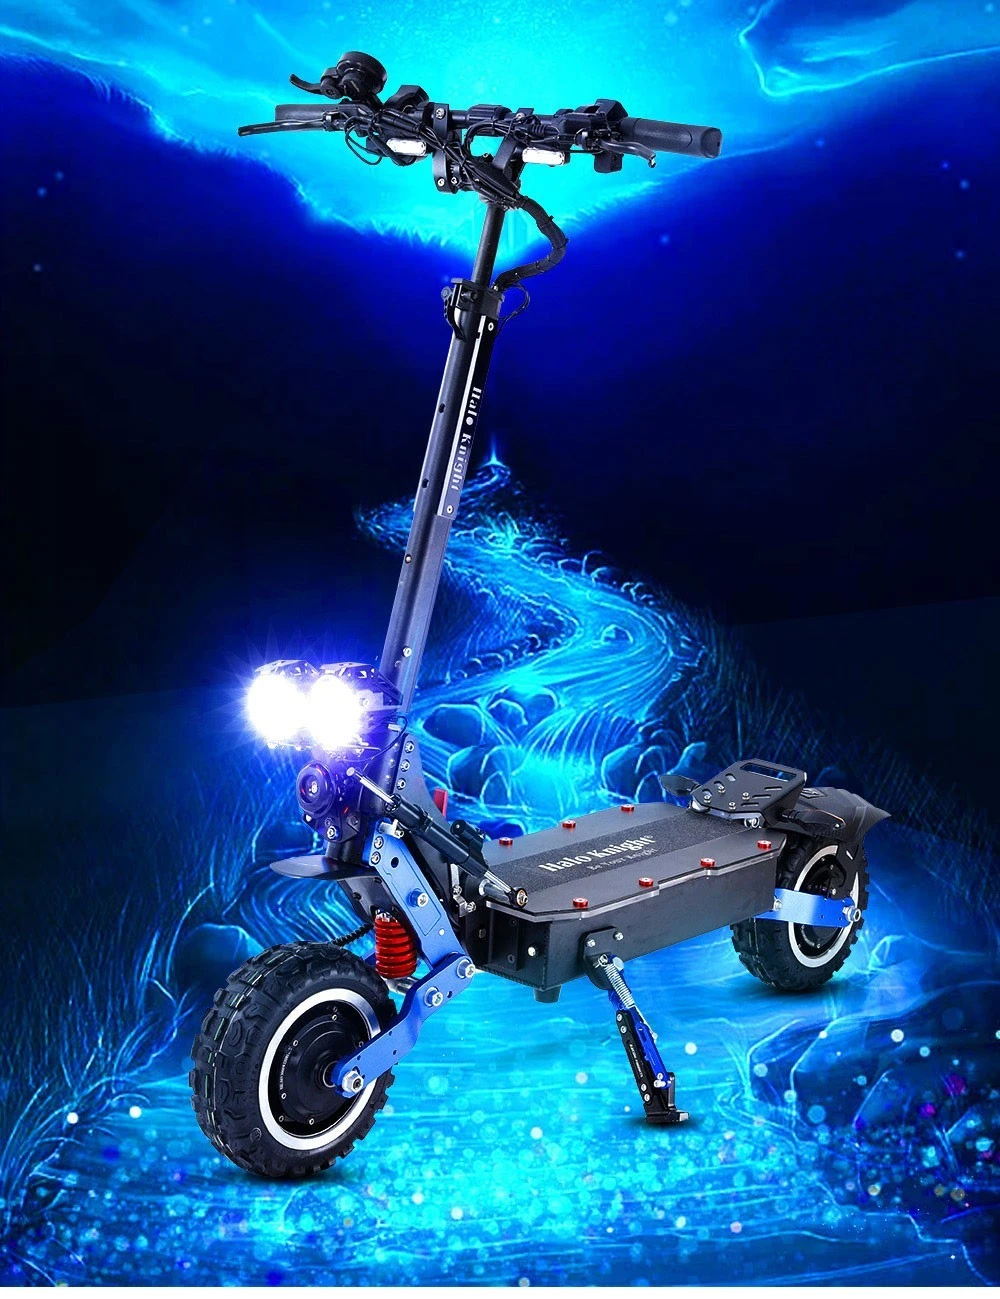 https://img.gkbcdn.com/d/202303/Halo-Knight-T108-Pro-Electric-Scooter-11---Off-road-Tire-519912-1._p1_.jpg